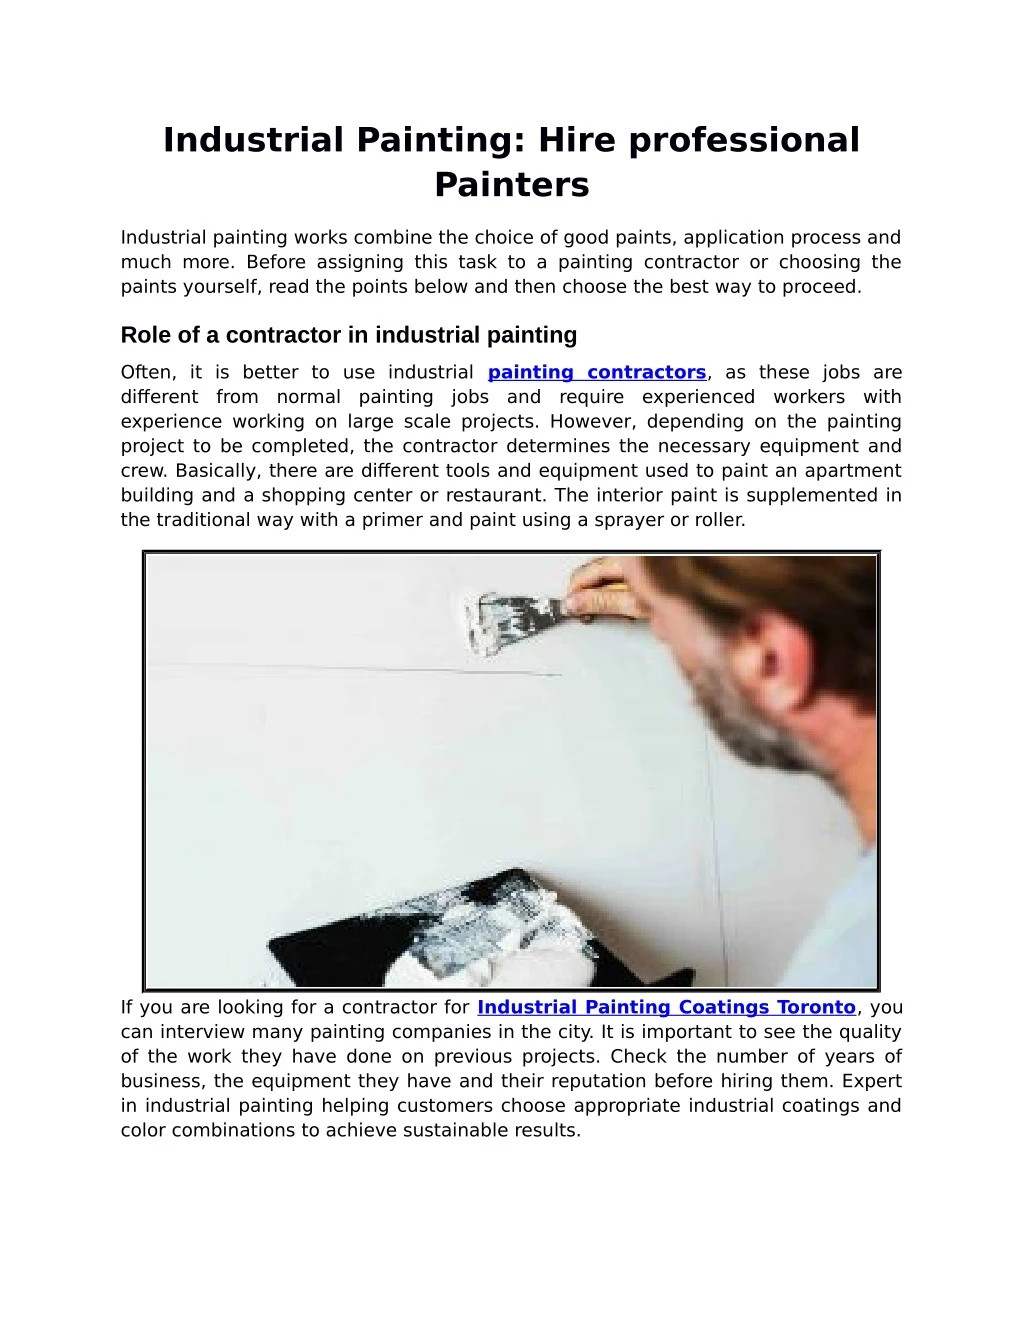 industrial painting hire professional painters